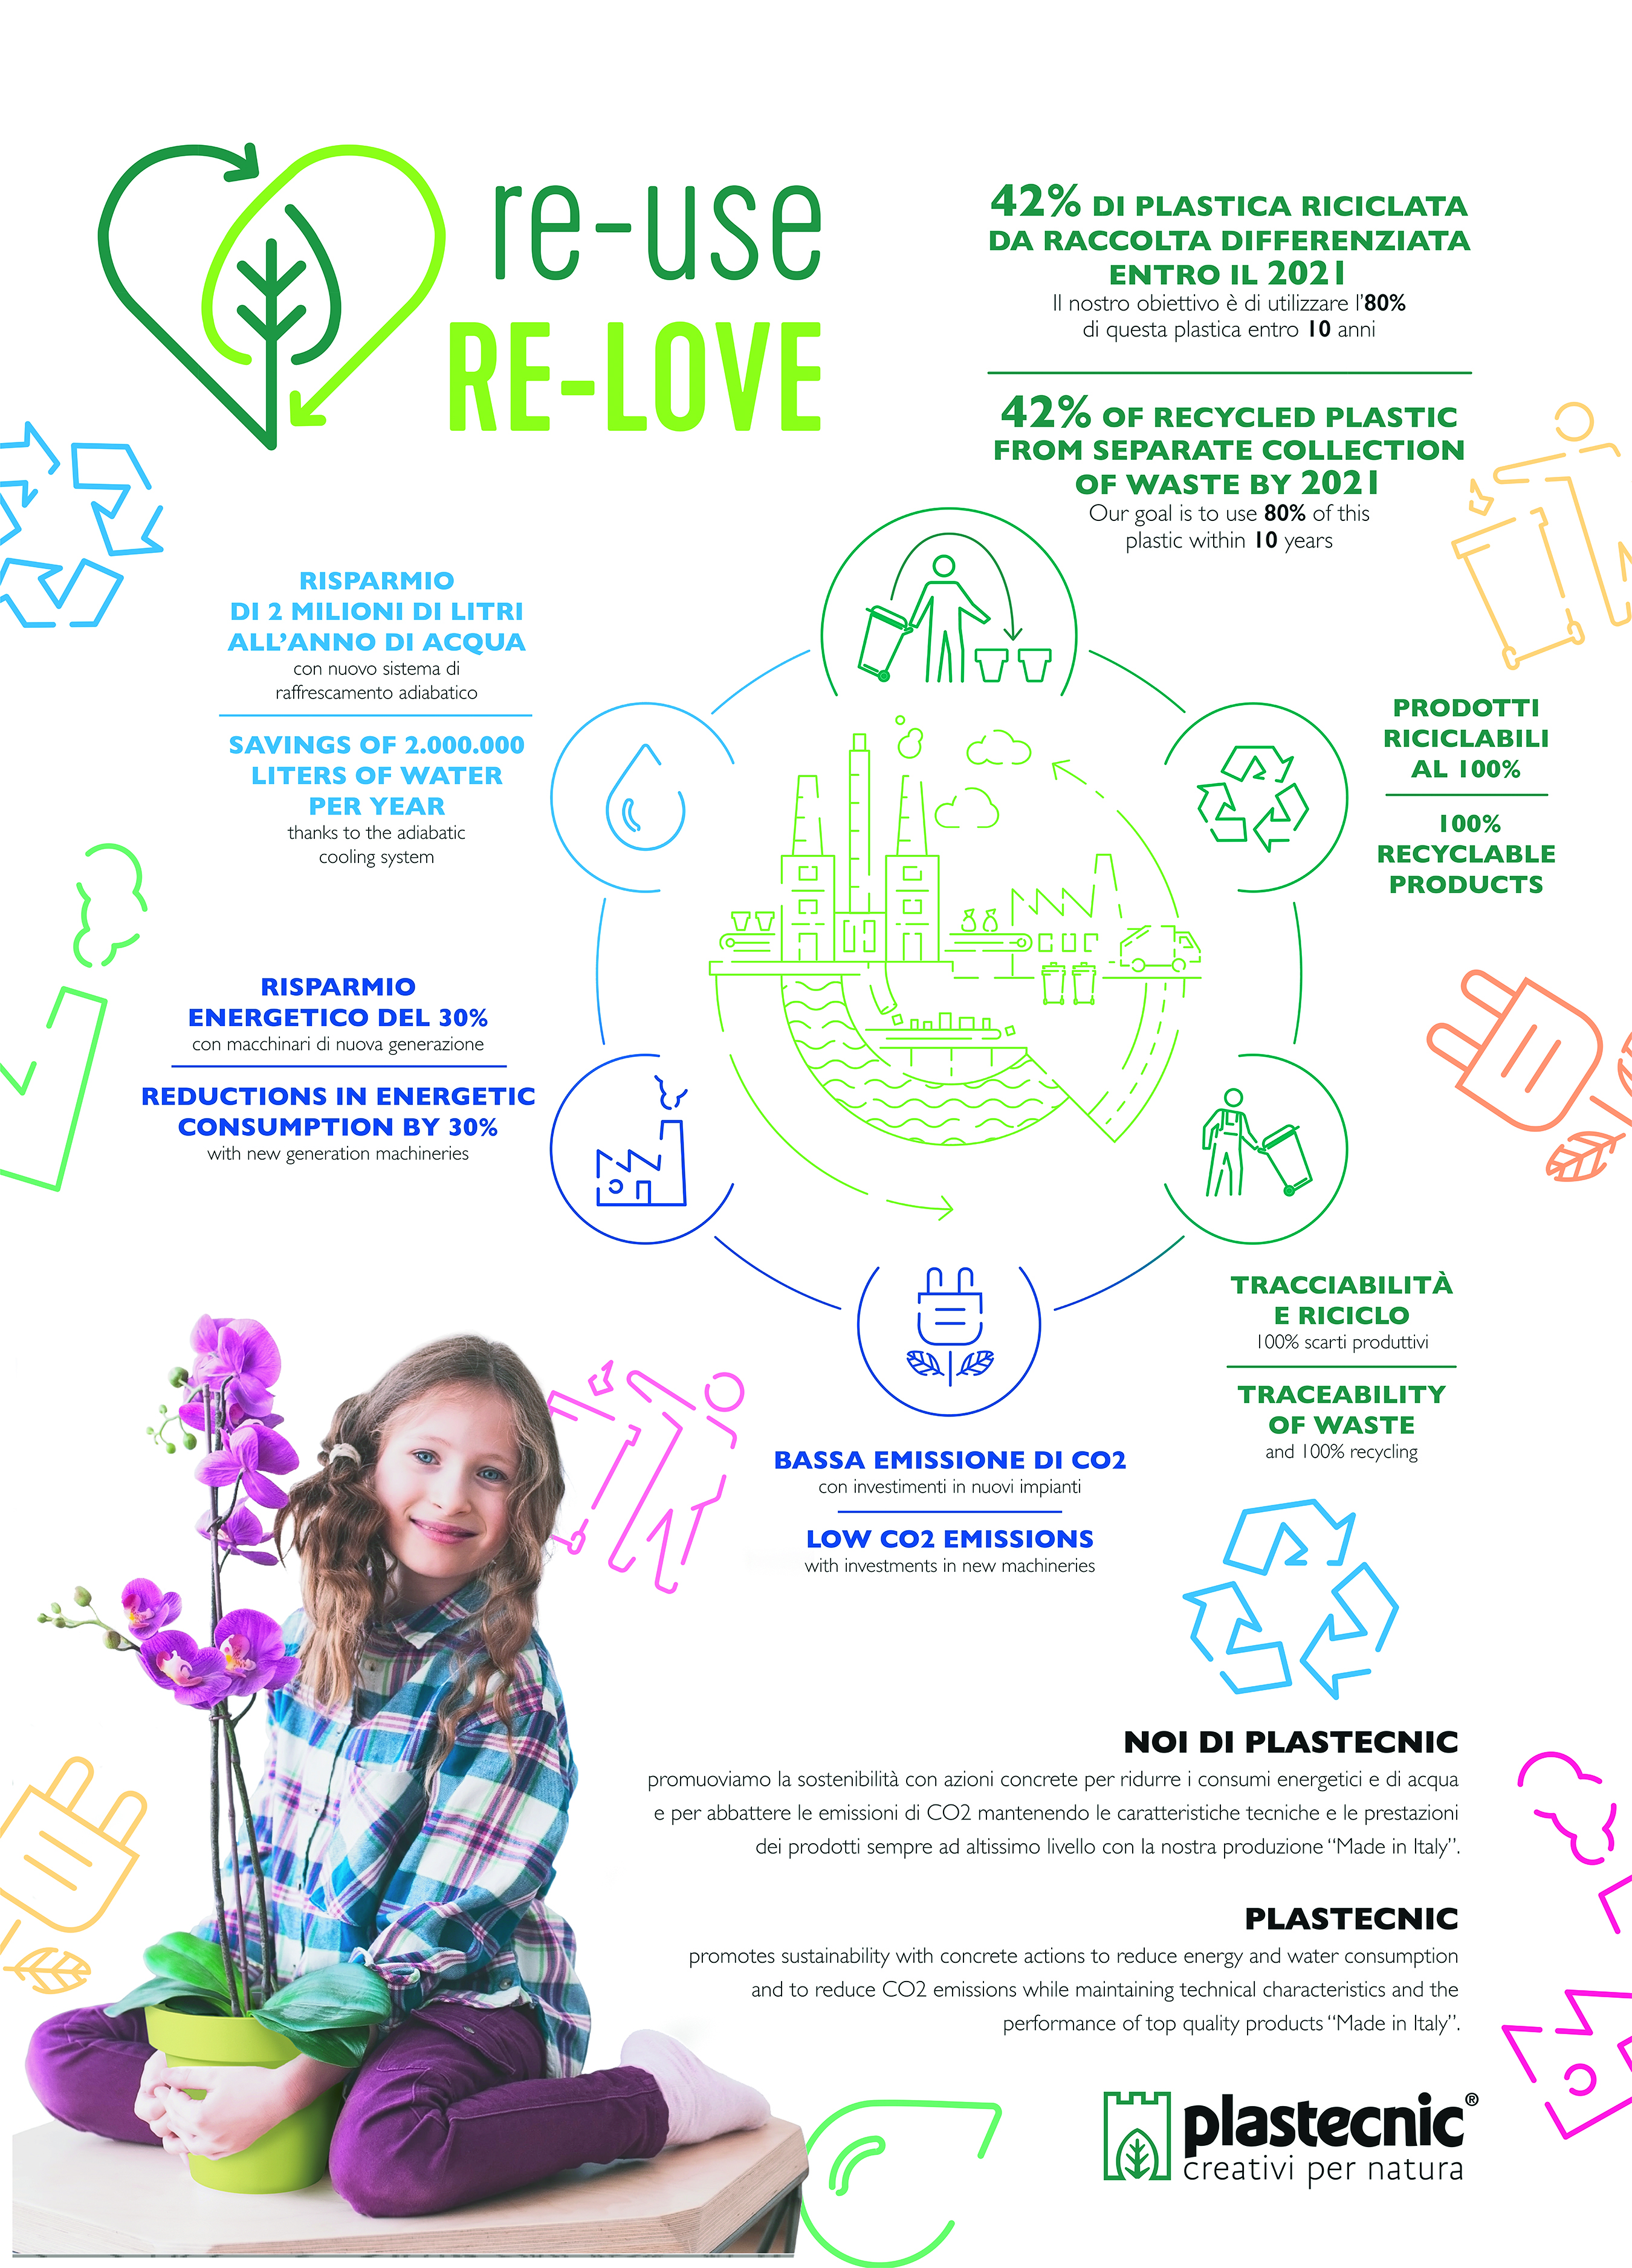 The new Plastecnic project : “re-use RE-LOVE”